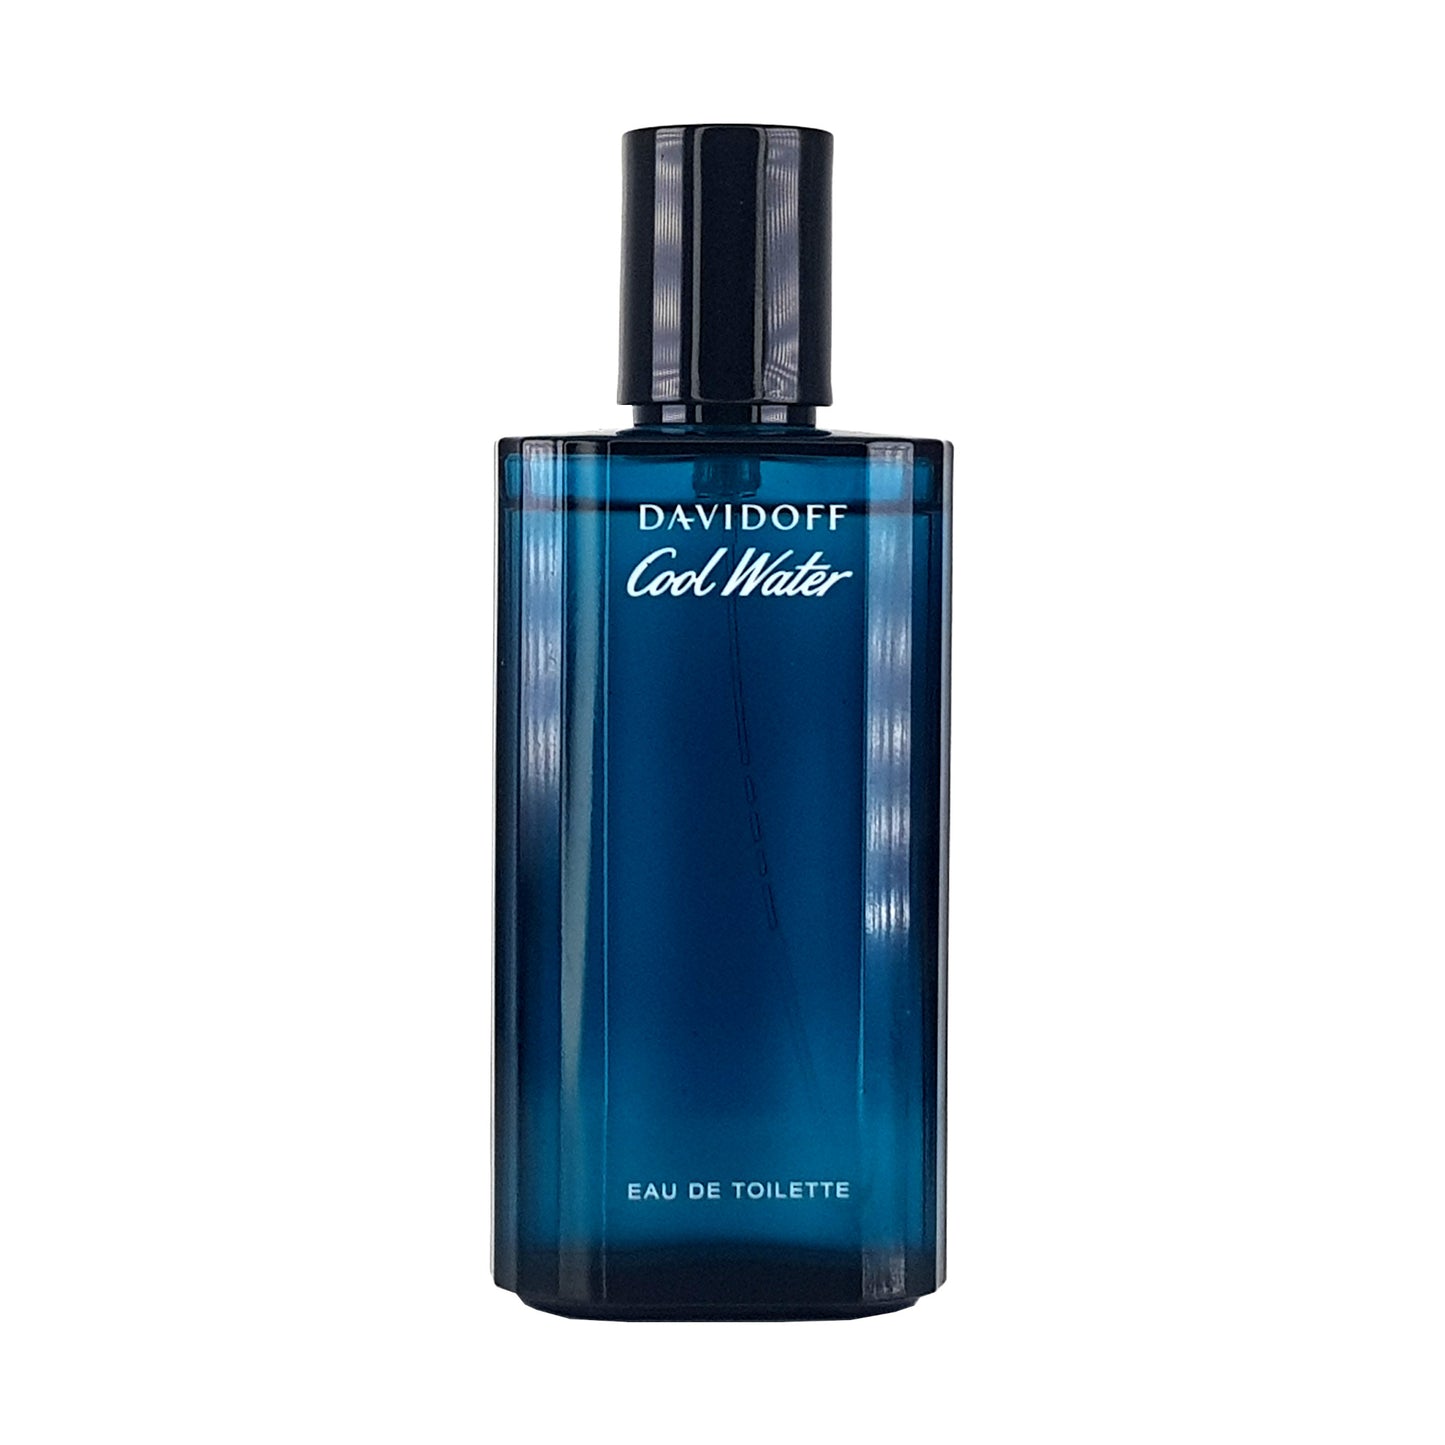 Davidoff Cool Water pour homme, Edt 75ml